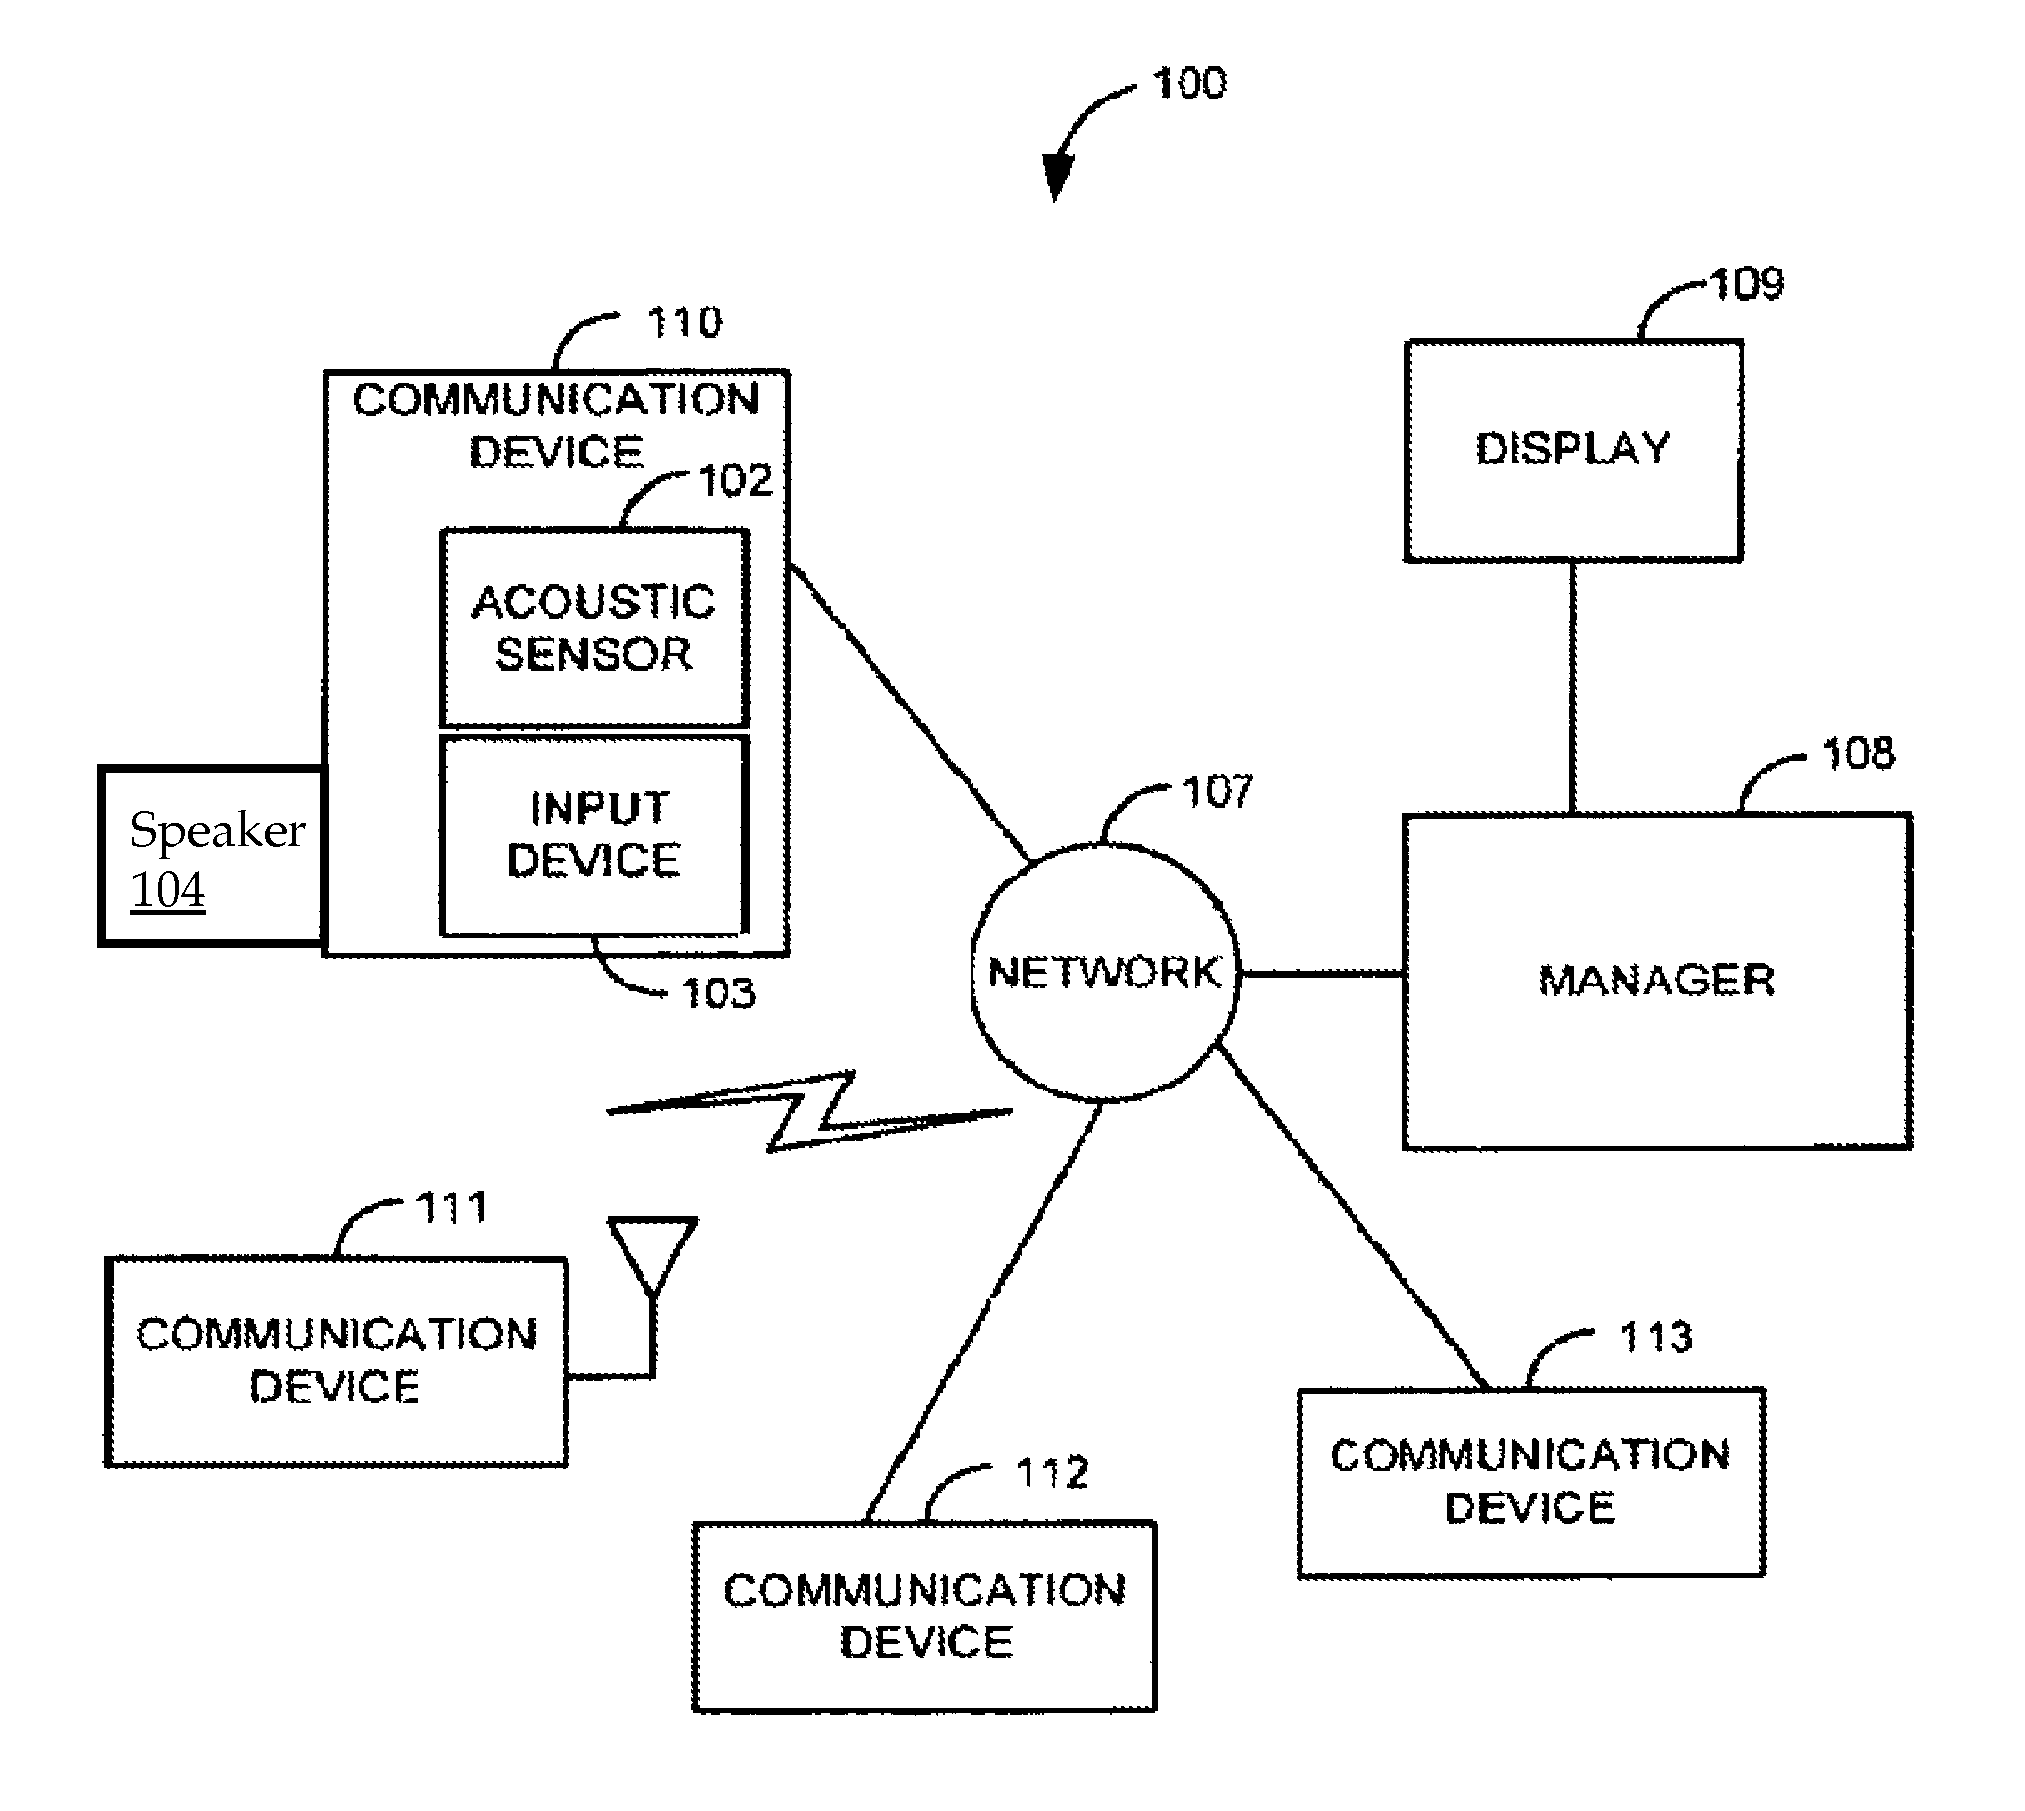 System and method to use enterprise communication systems to measure and control workplace noise